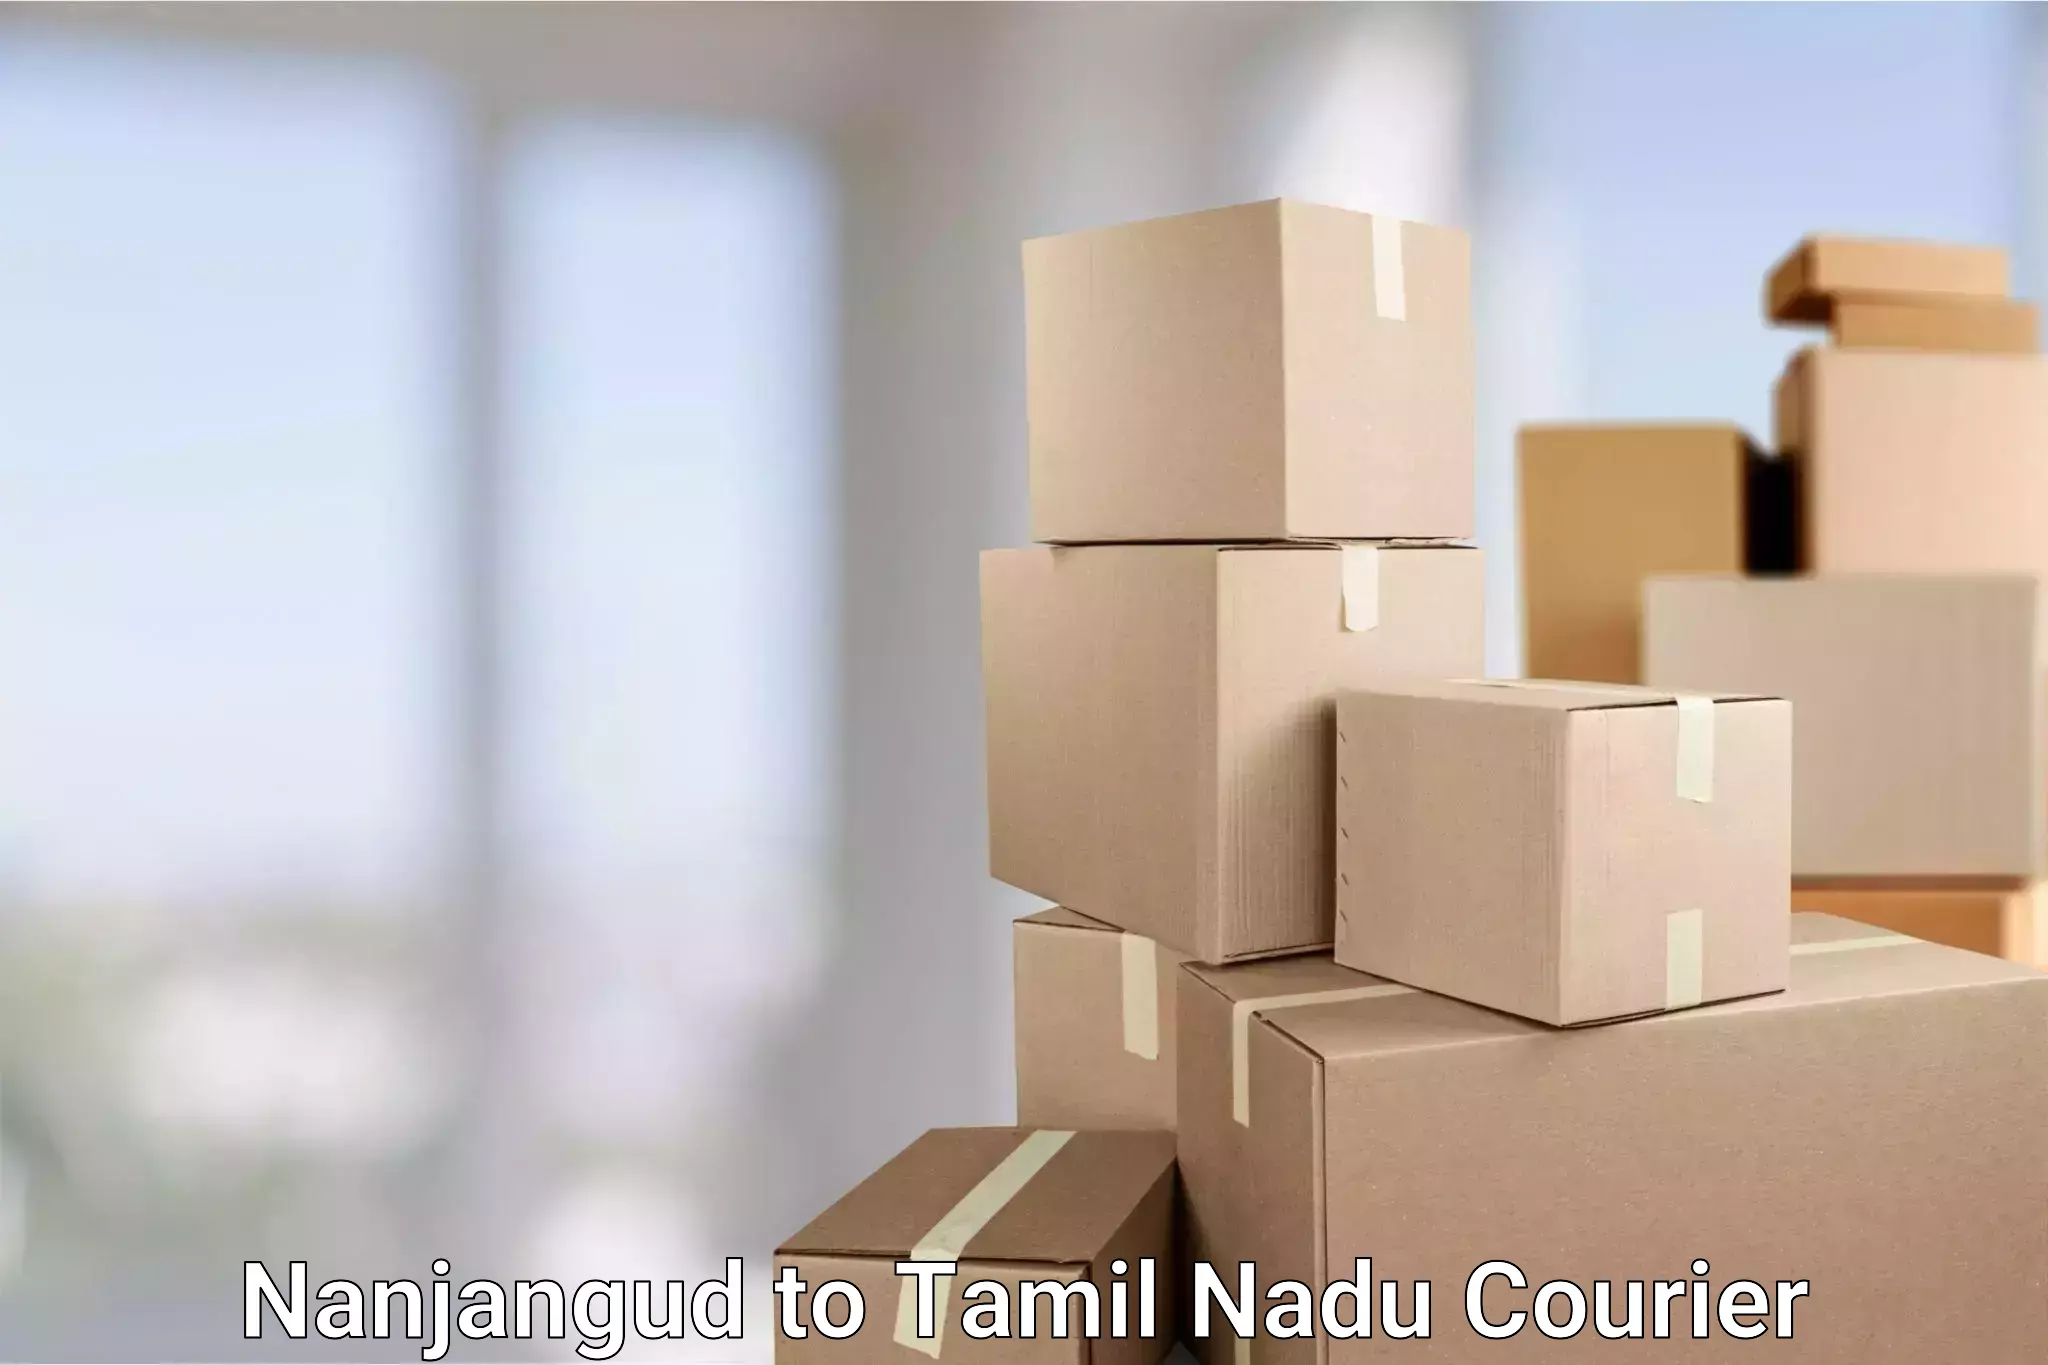 24-hour courier services Nanjangud to Tuticorin Port